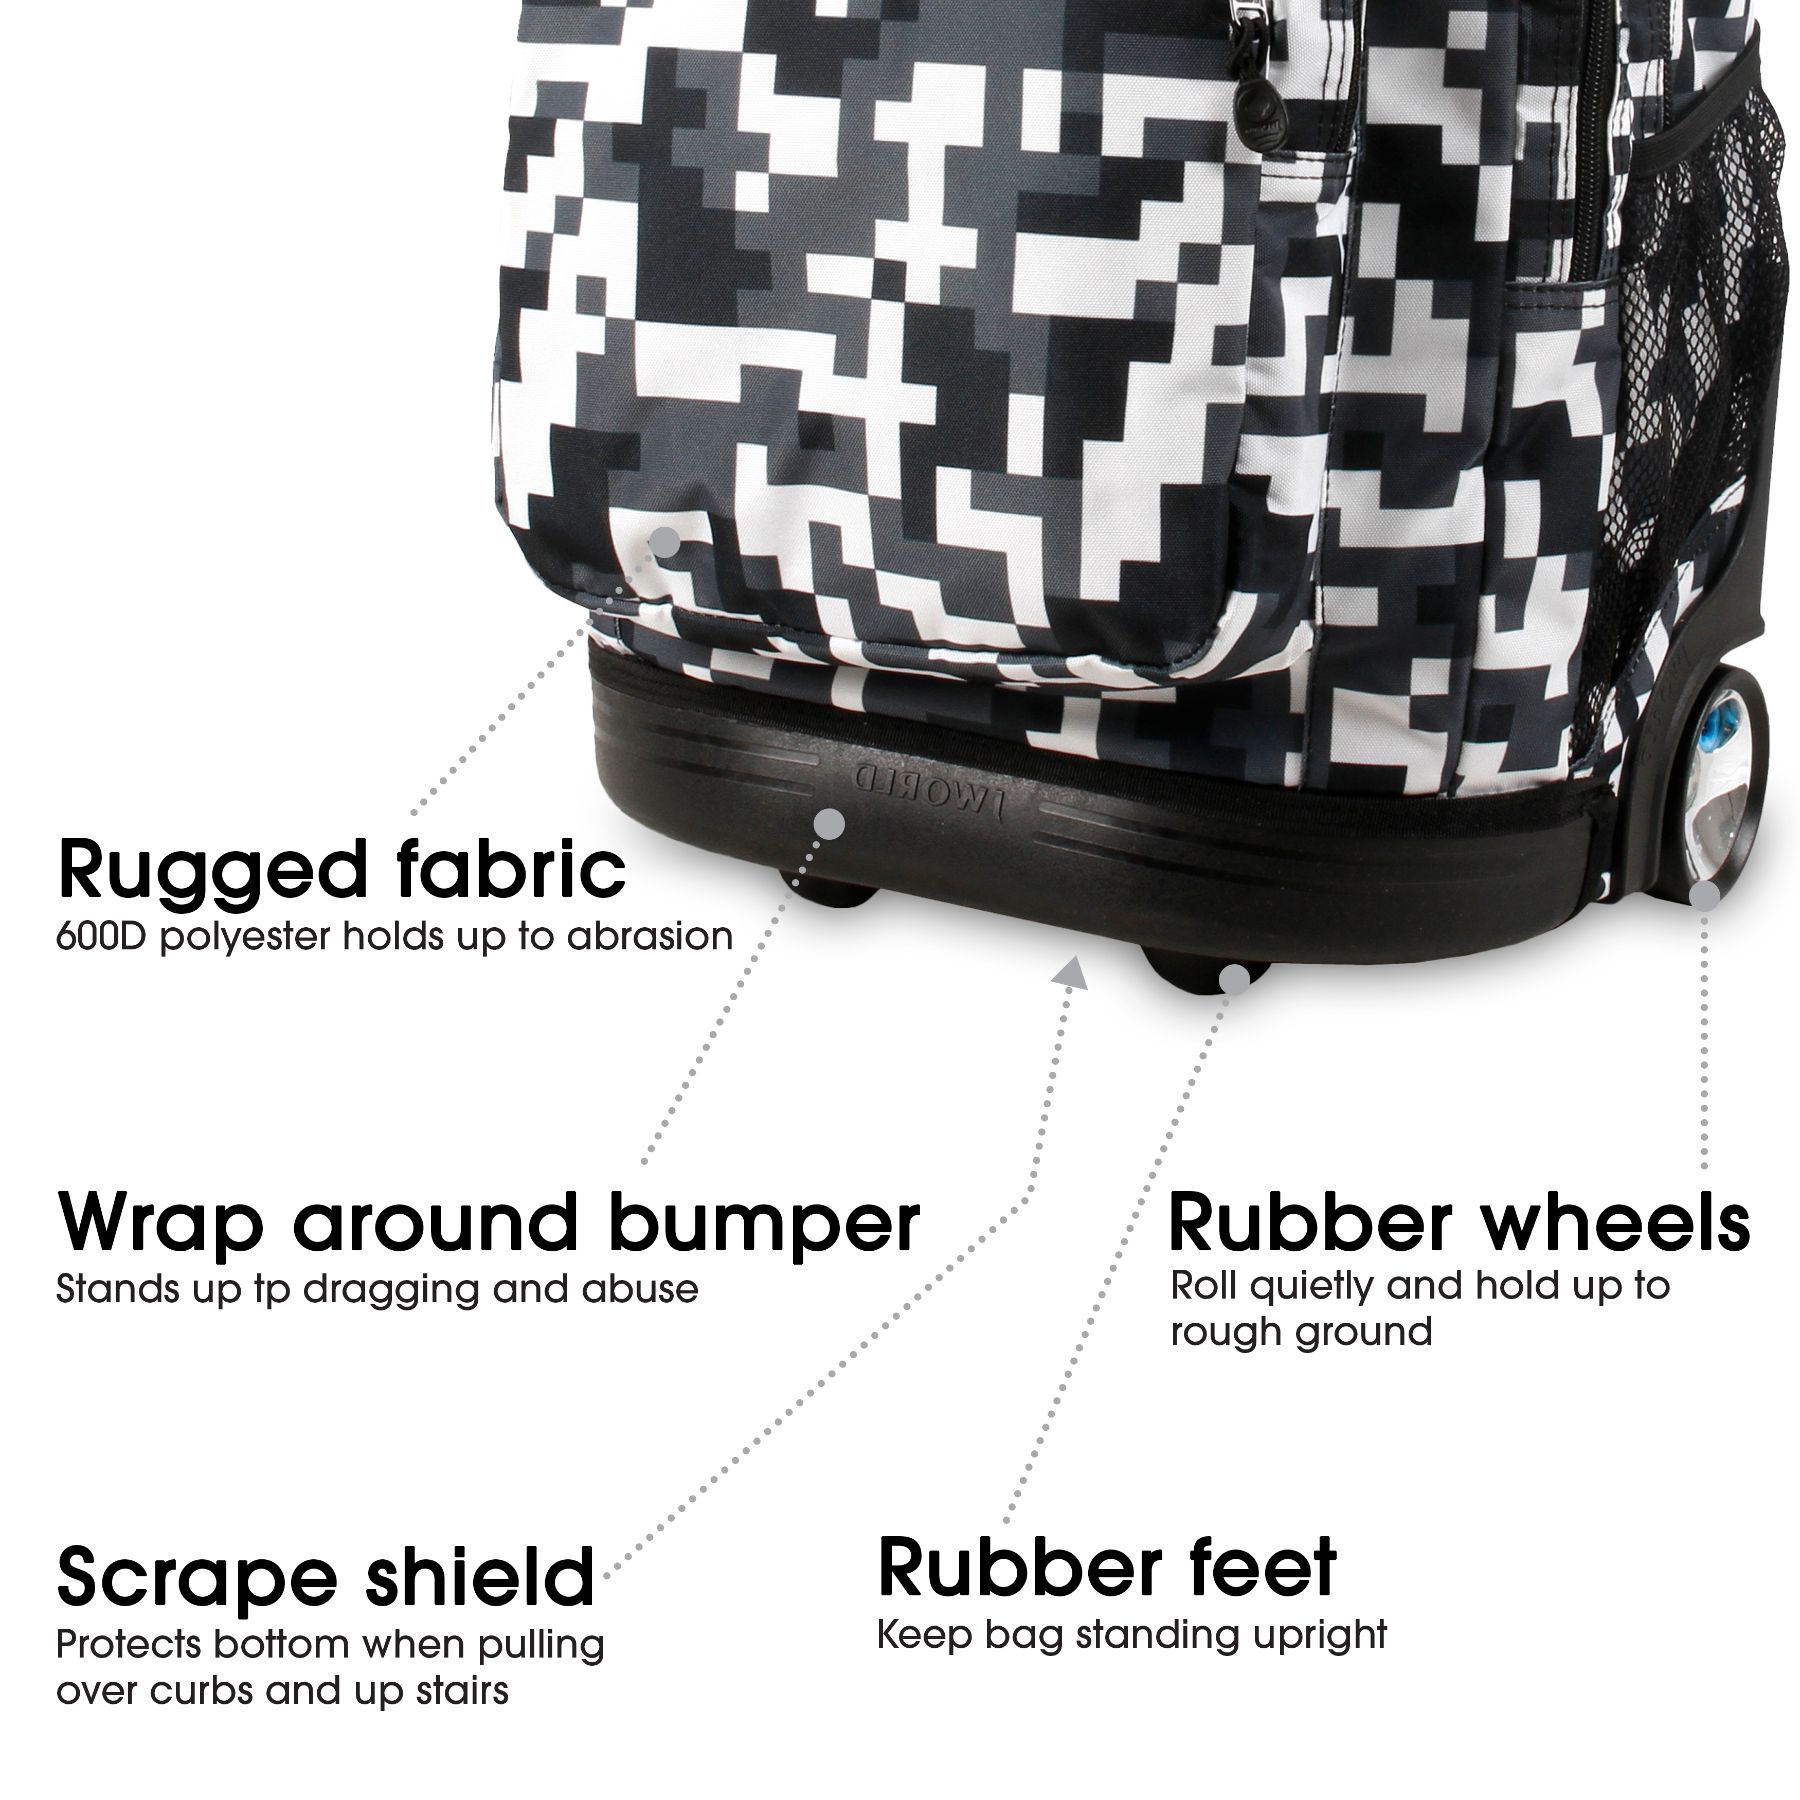 J World Unisex Sundance 20" Rolling Backpack with Laptop Sleeve for School and Travel, Camo - image 5 of 7